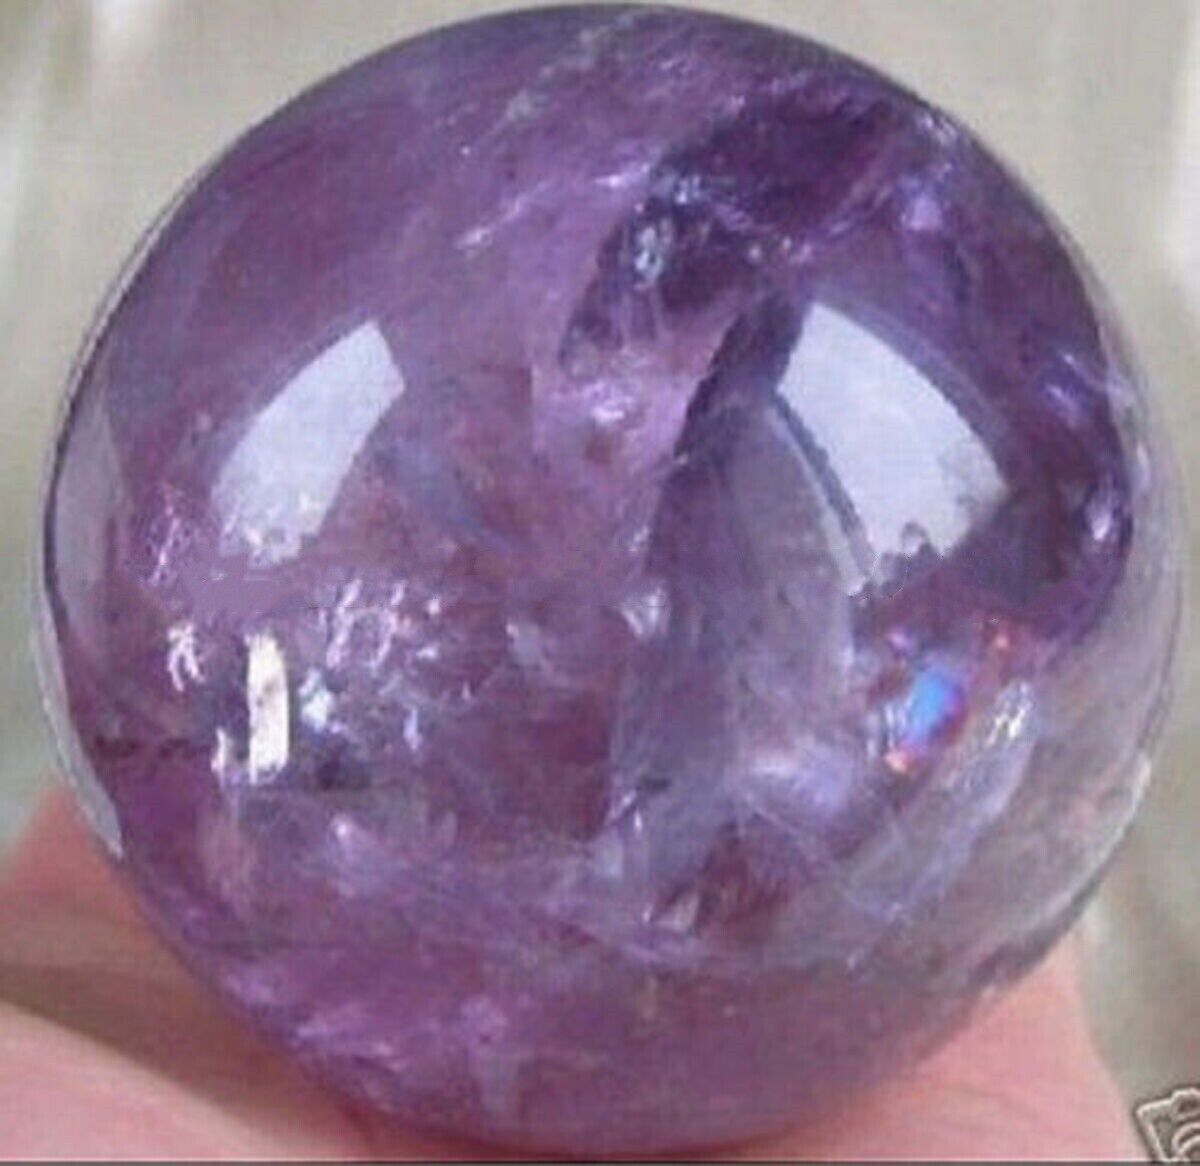 AAA+ Natural Amethyst Quartz Crystal Sphere Ball Healing Stone 38-40mm + Stand